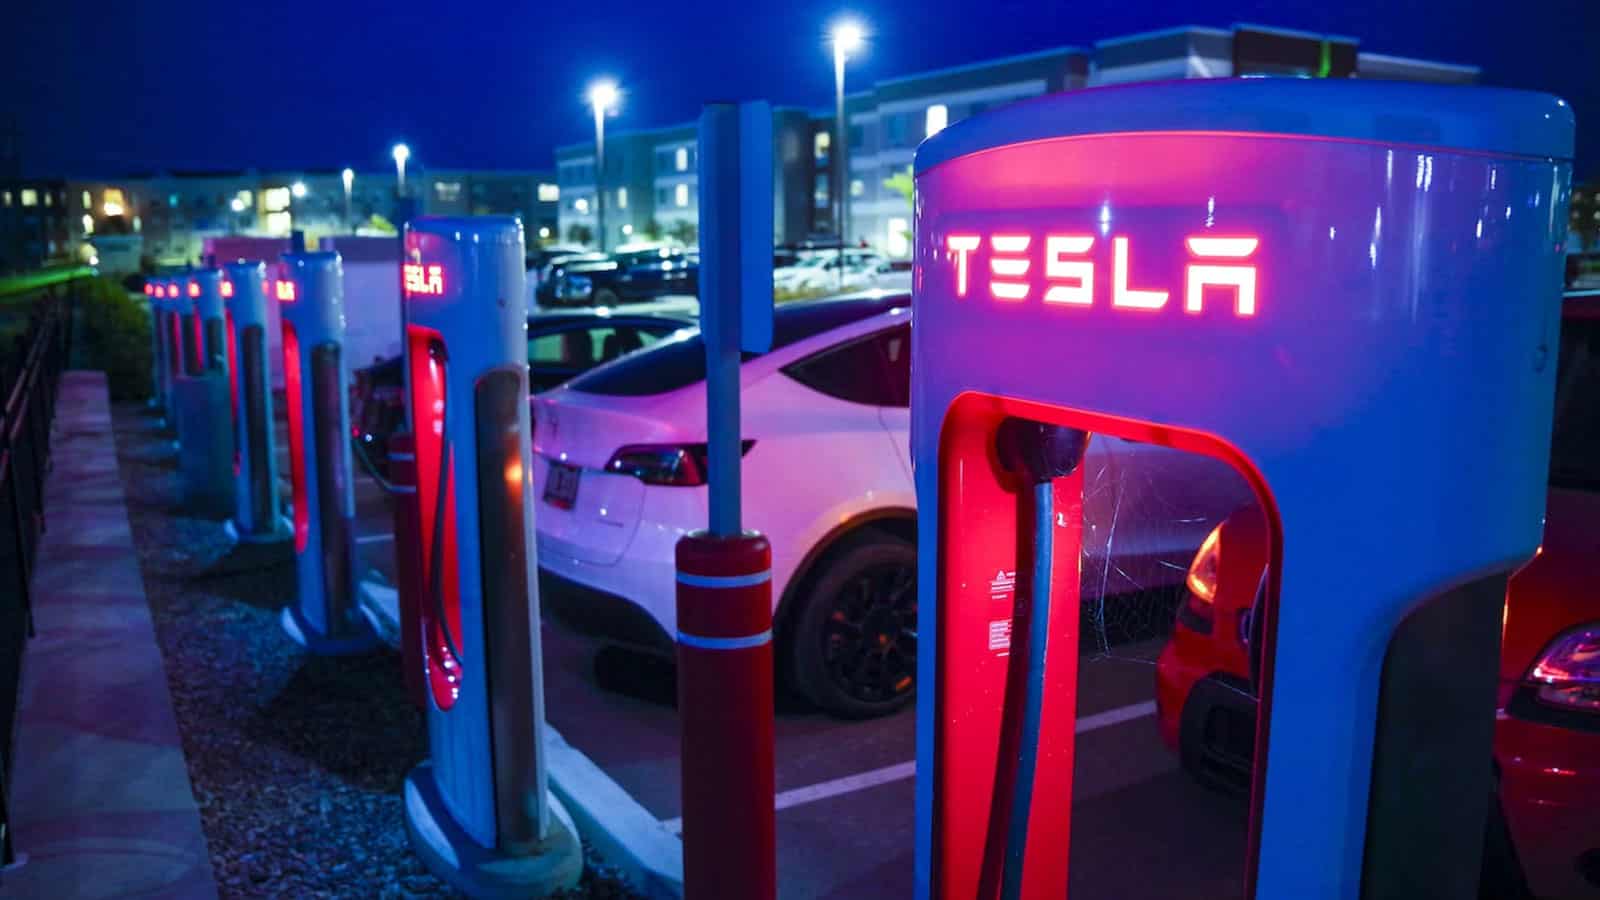 TESLA supercharger row in parking lot, glowing red with blue twilight sky